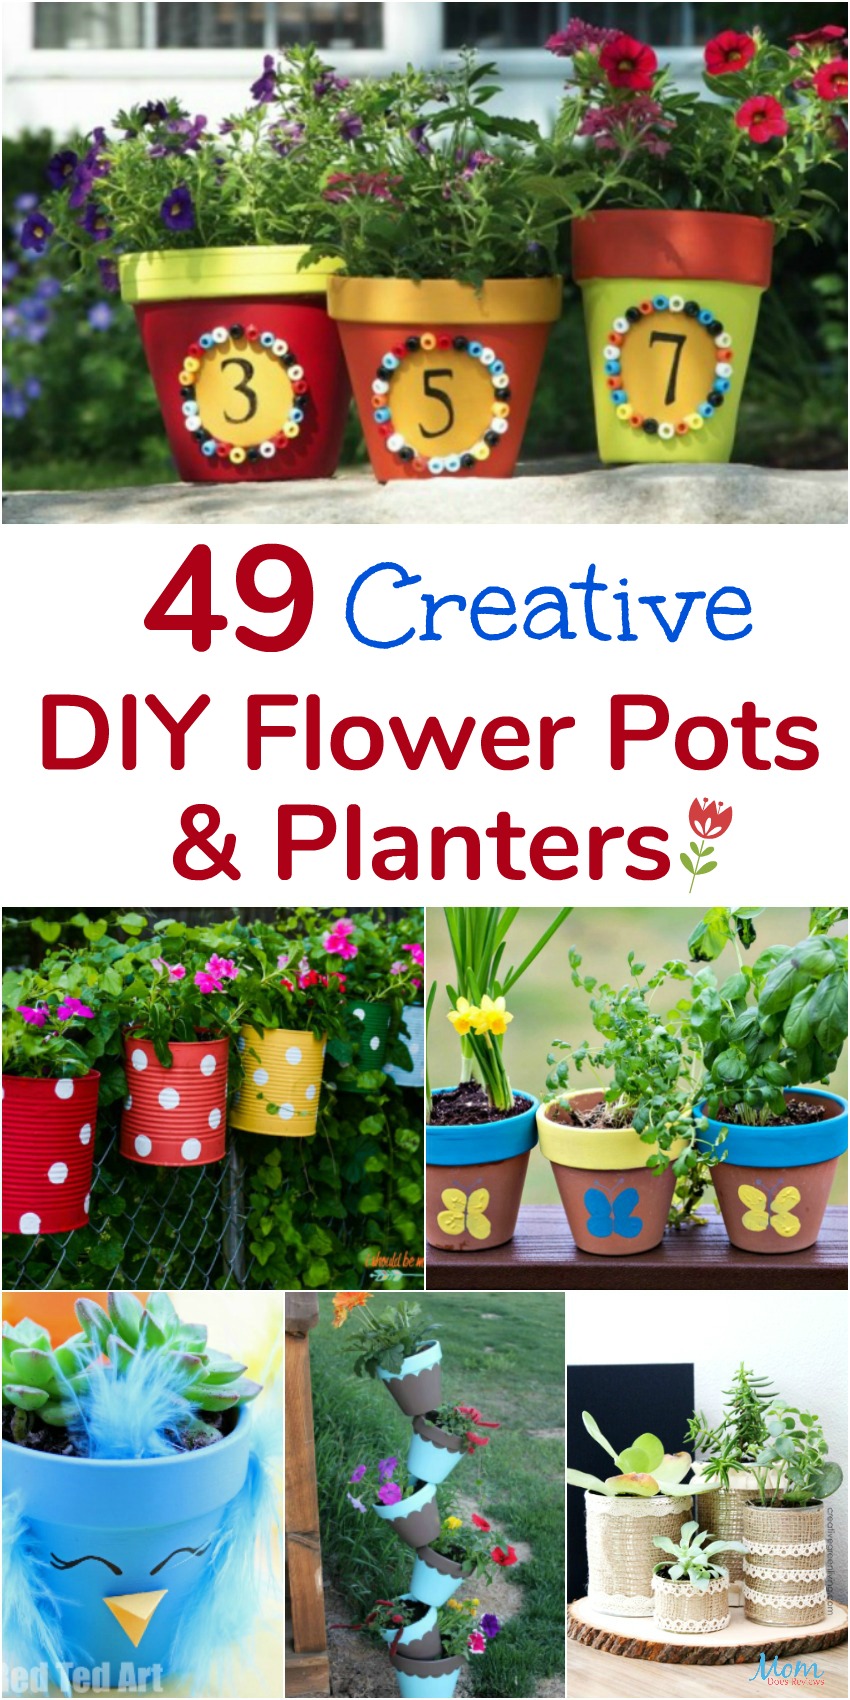 Creative Diy Flower Pots And Planters